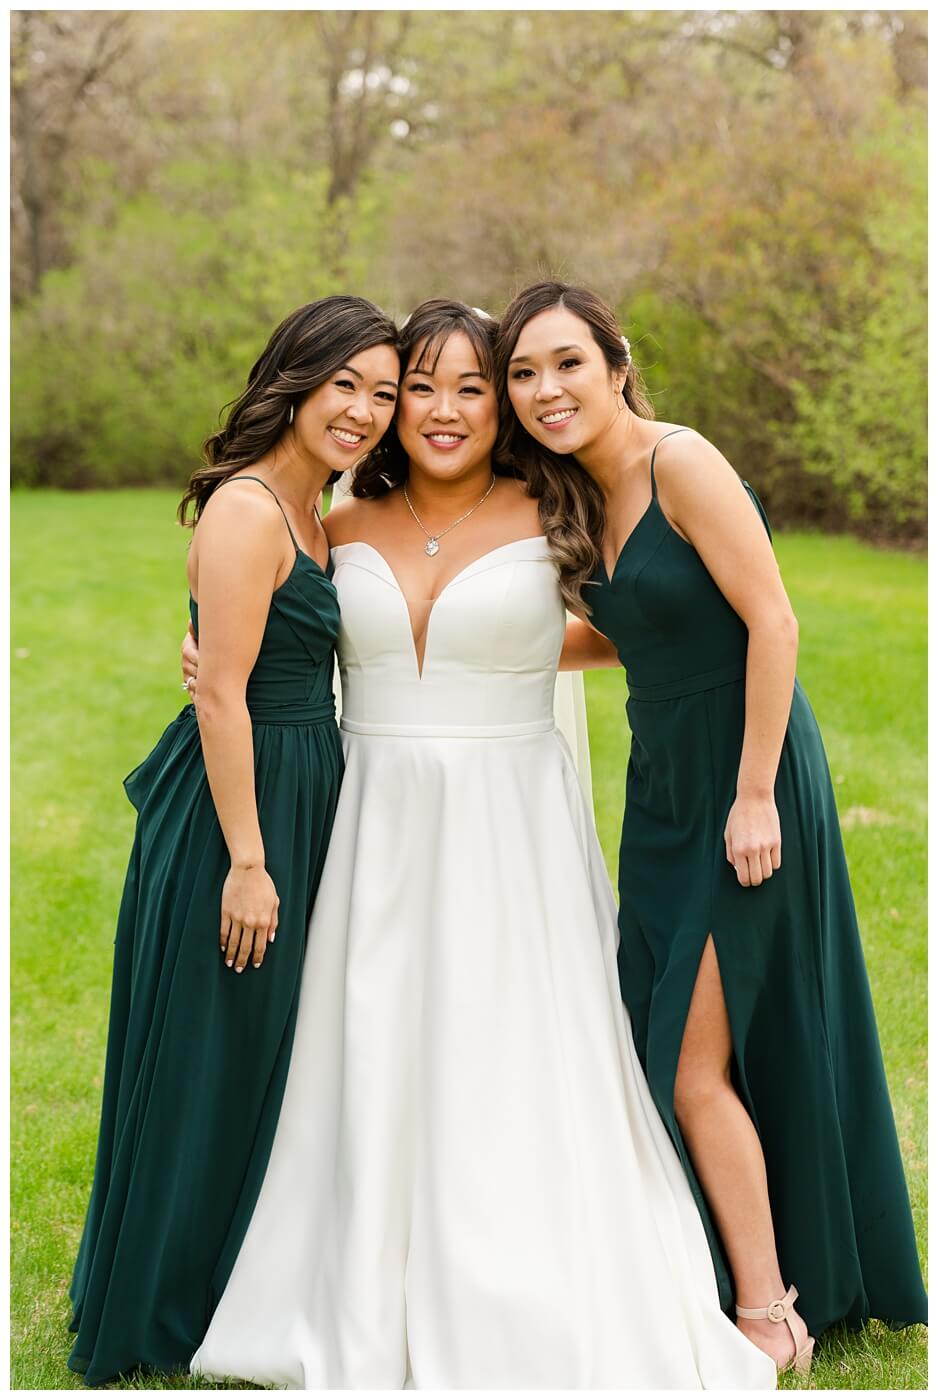 Sam & Benton - Wascana Park - 20 - Bride with her sisters